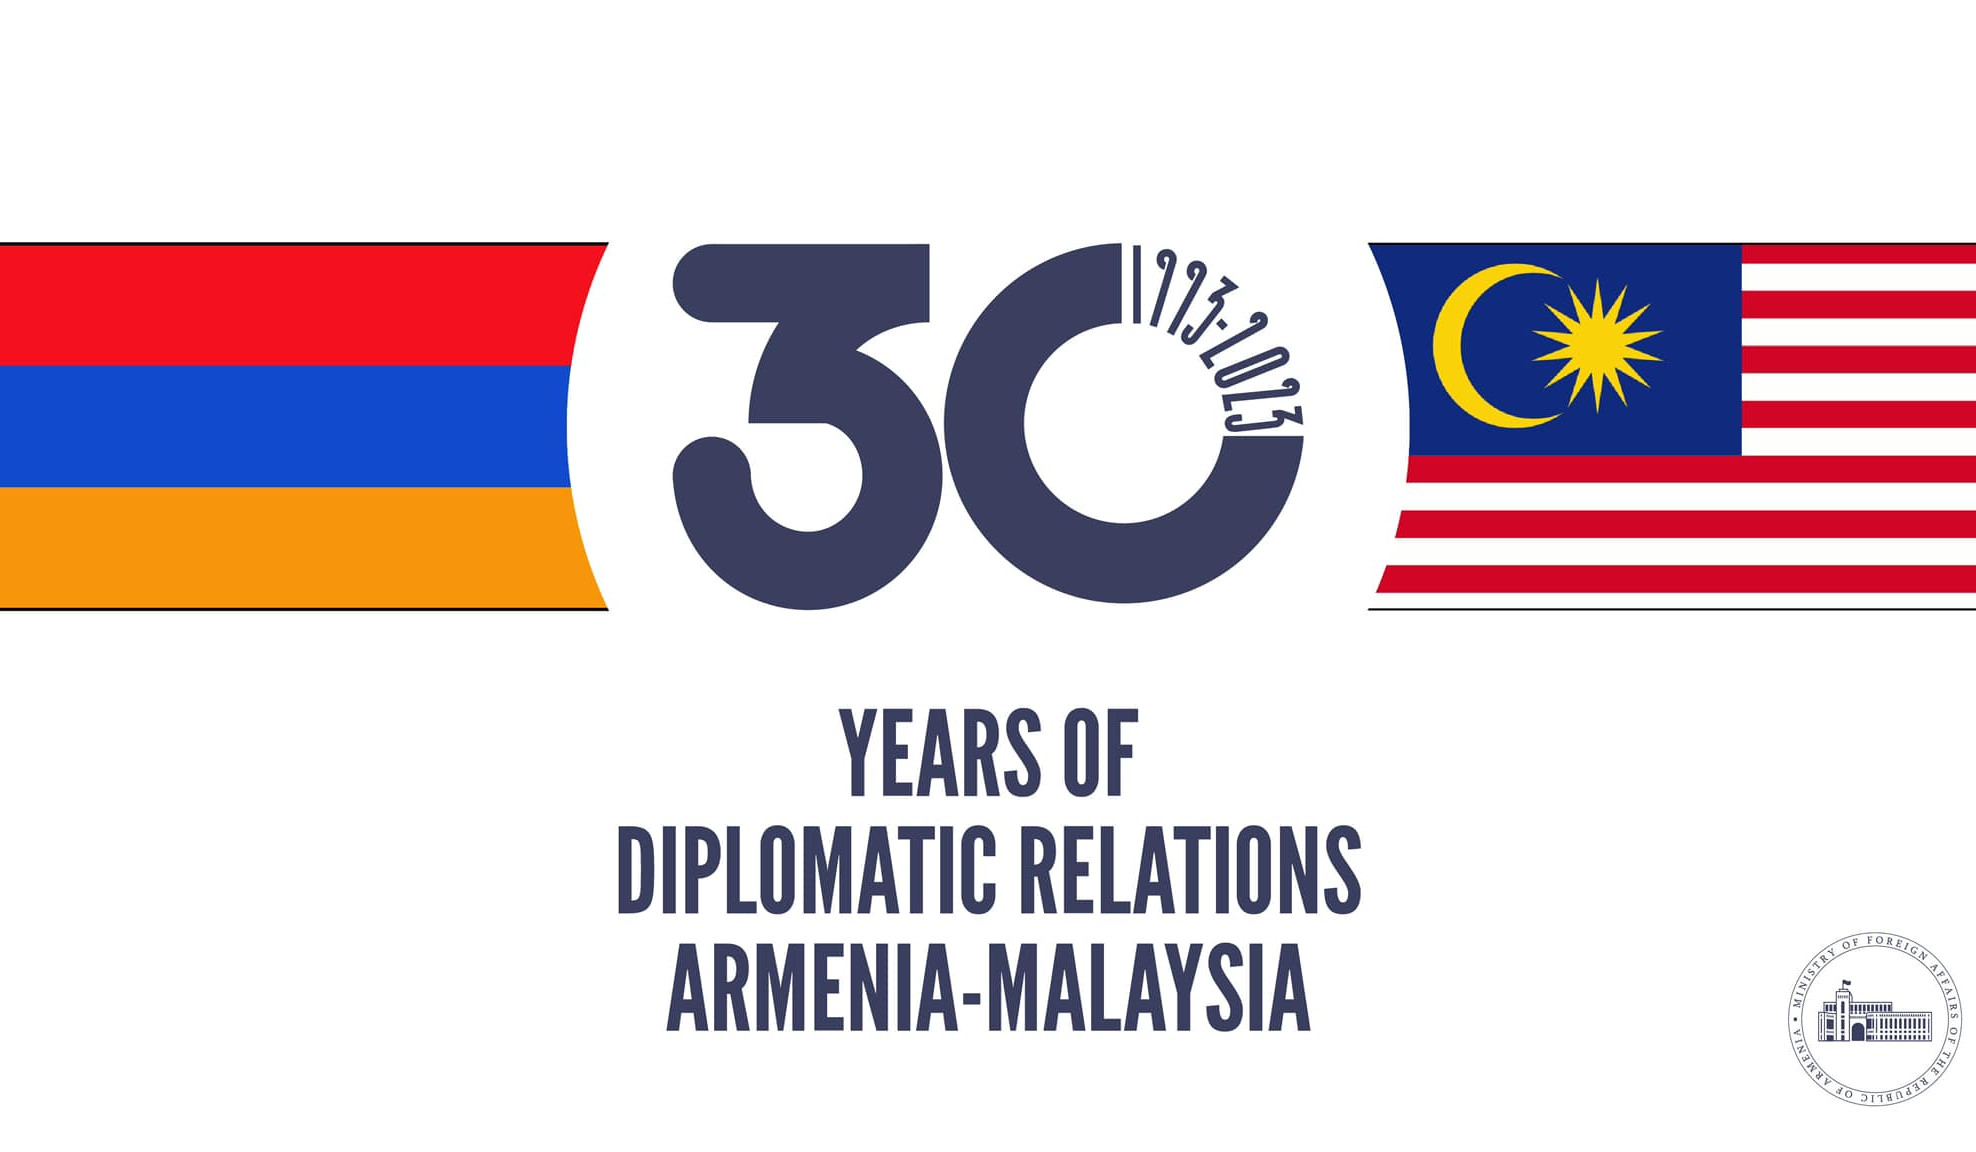 30th anniversary of establishment of diplomatic relations between Armenia and Malaysia